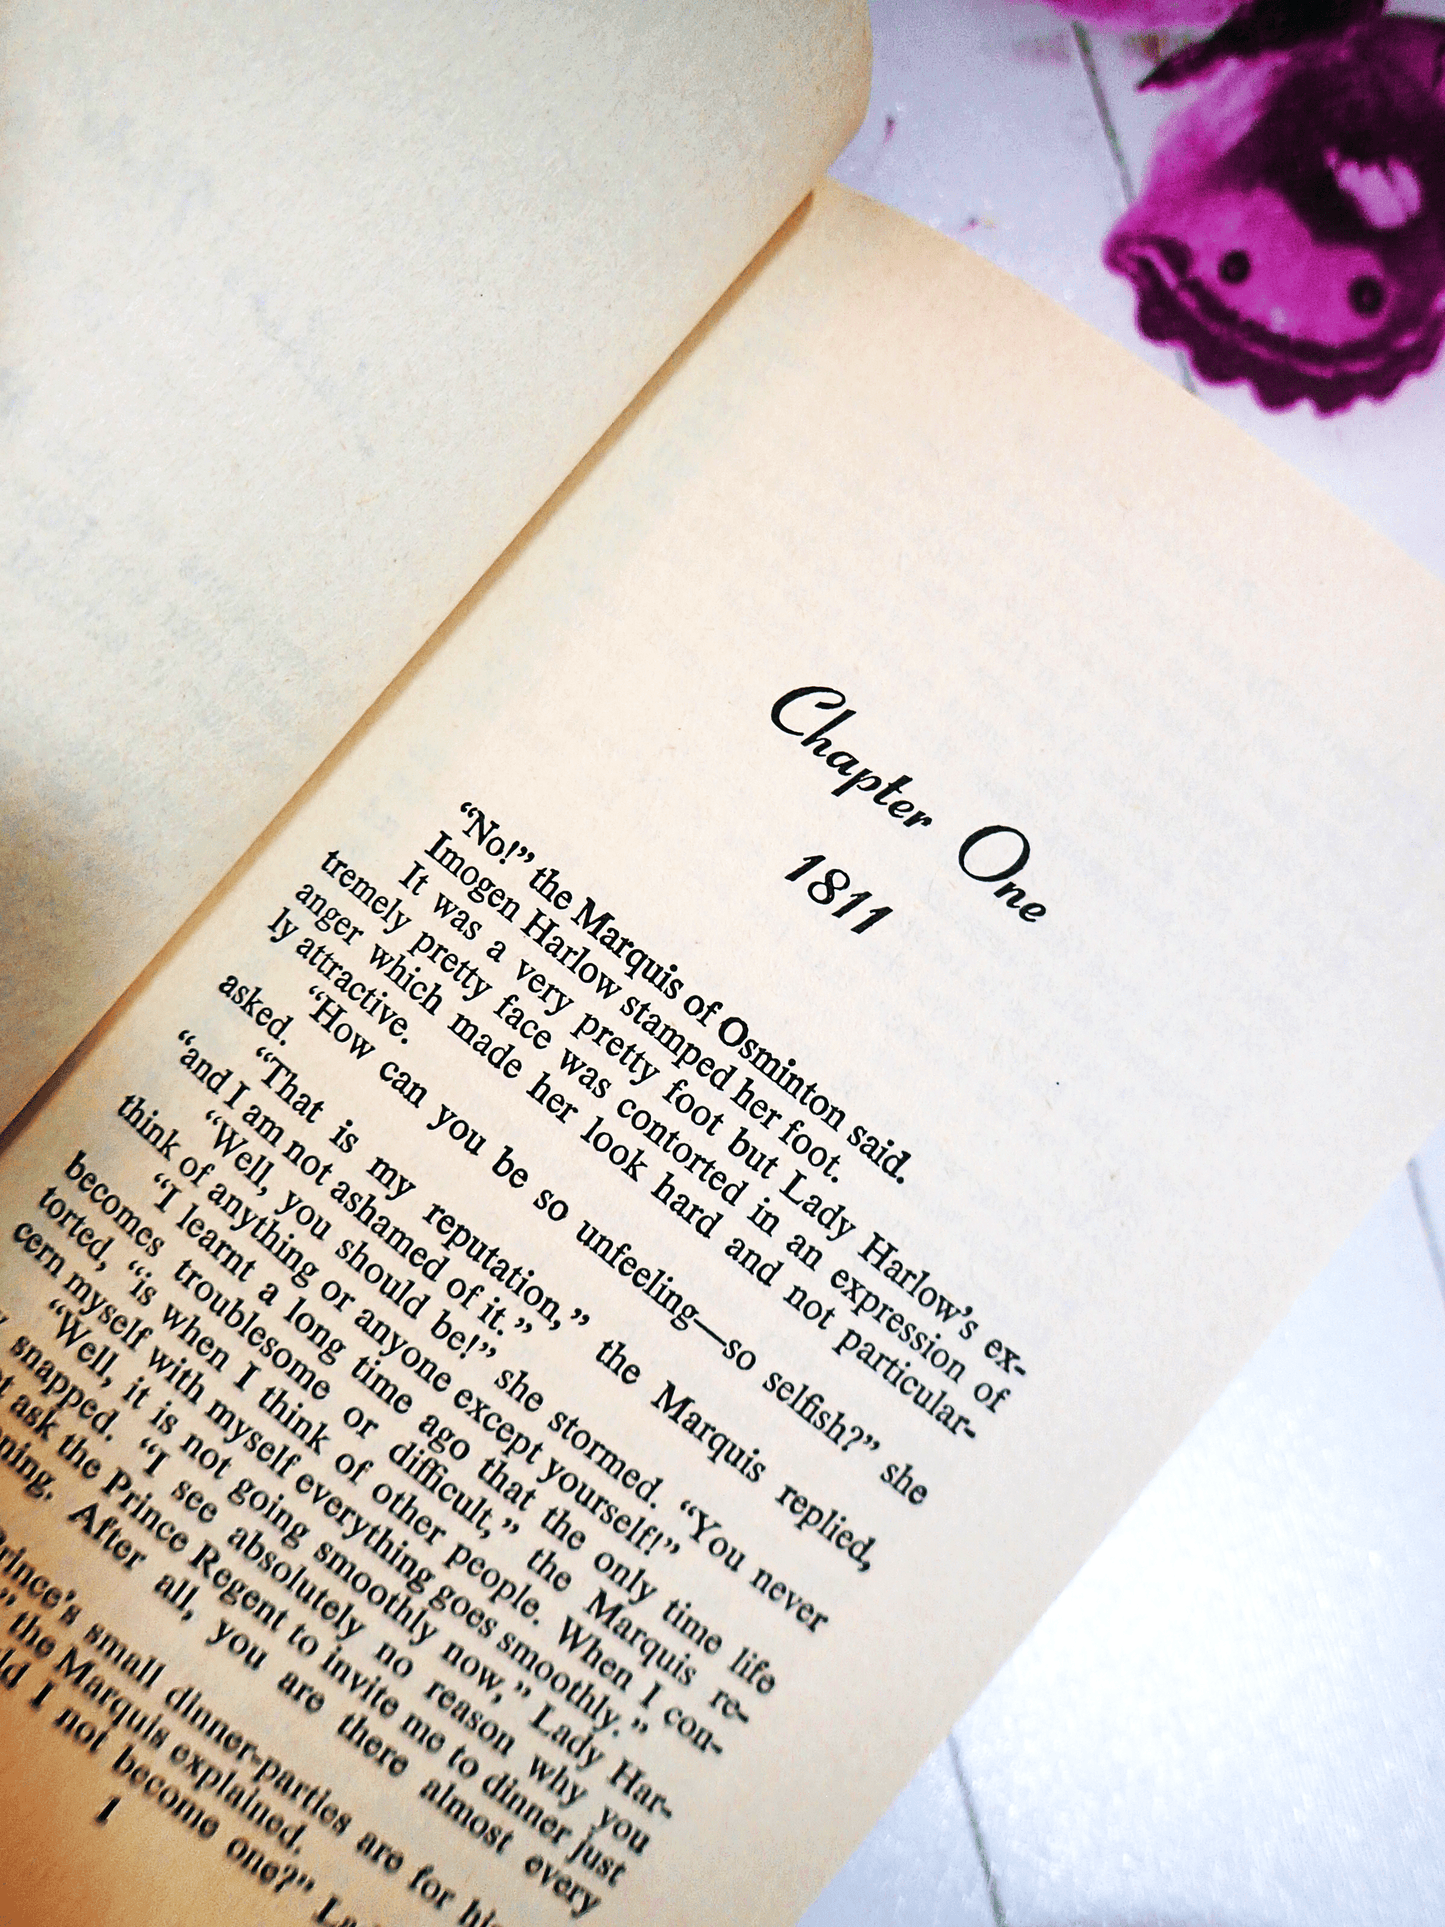 First Page of The Problems of Love Barbara Cartland Corgi showing text: "Chapter One 1811"